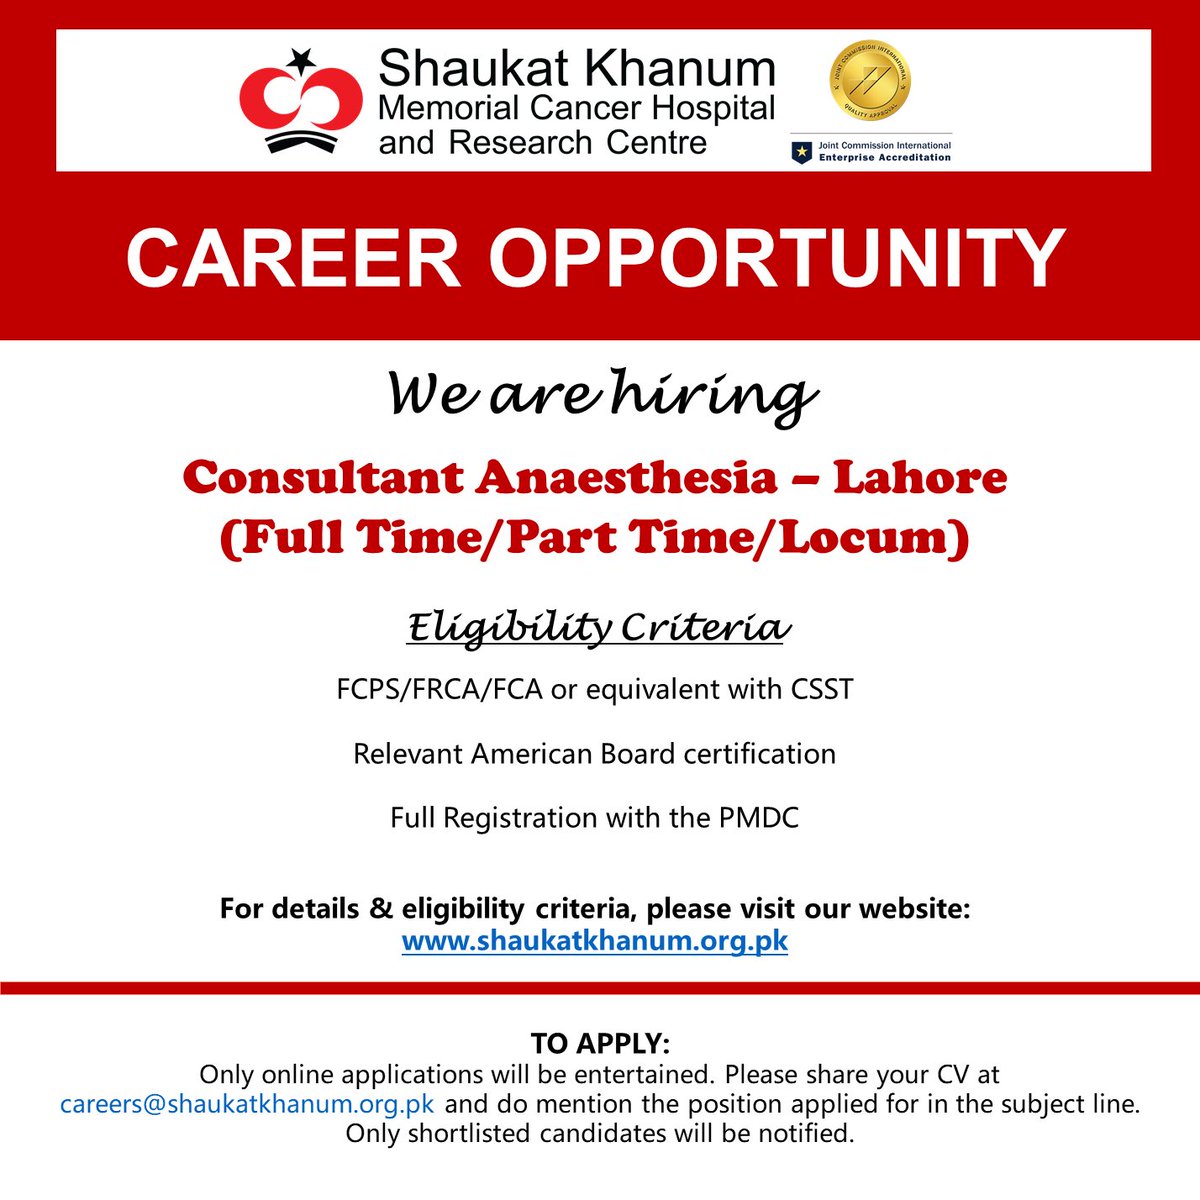 Career Opportunity at Shaukat Khanum Hospital, Lahore.
➡️ Consultant Anaesthesia – Lahore (Full Time/Part Time/Locum)

For details, visit: shaukatkhanum.org.pk/join-us/curren…

📞 +92 42 3590 5000 Ext.3028, 3037, 3038, 3041, 3057
✉️ careers@shaukatkhanum.org.pk

#CareersAtSKMCH #JobsInLahore